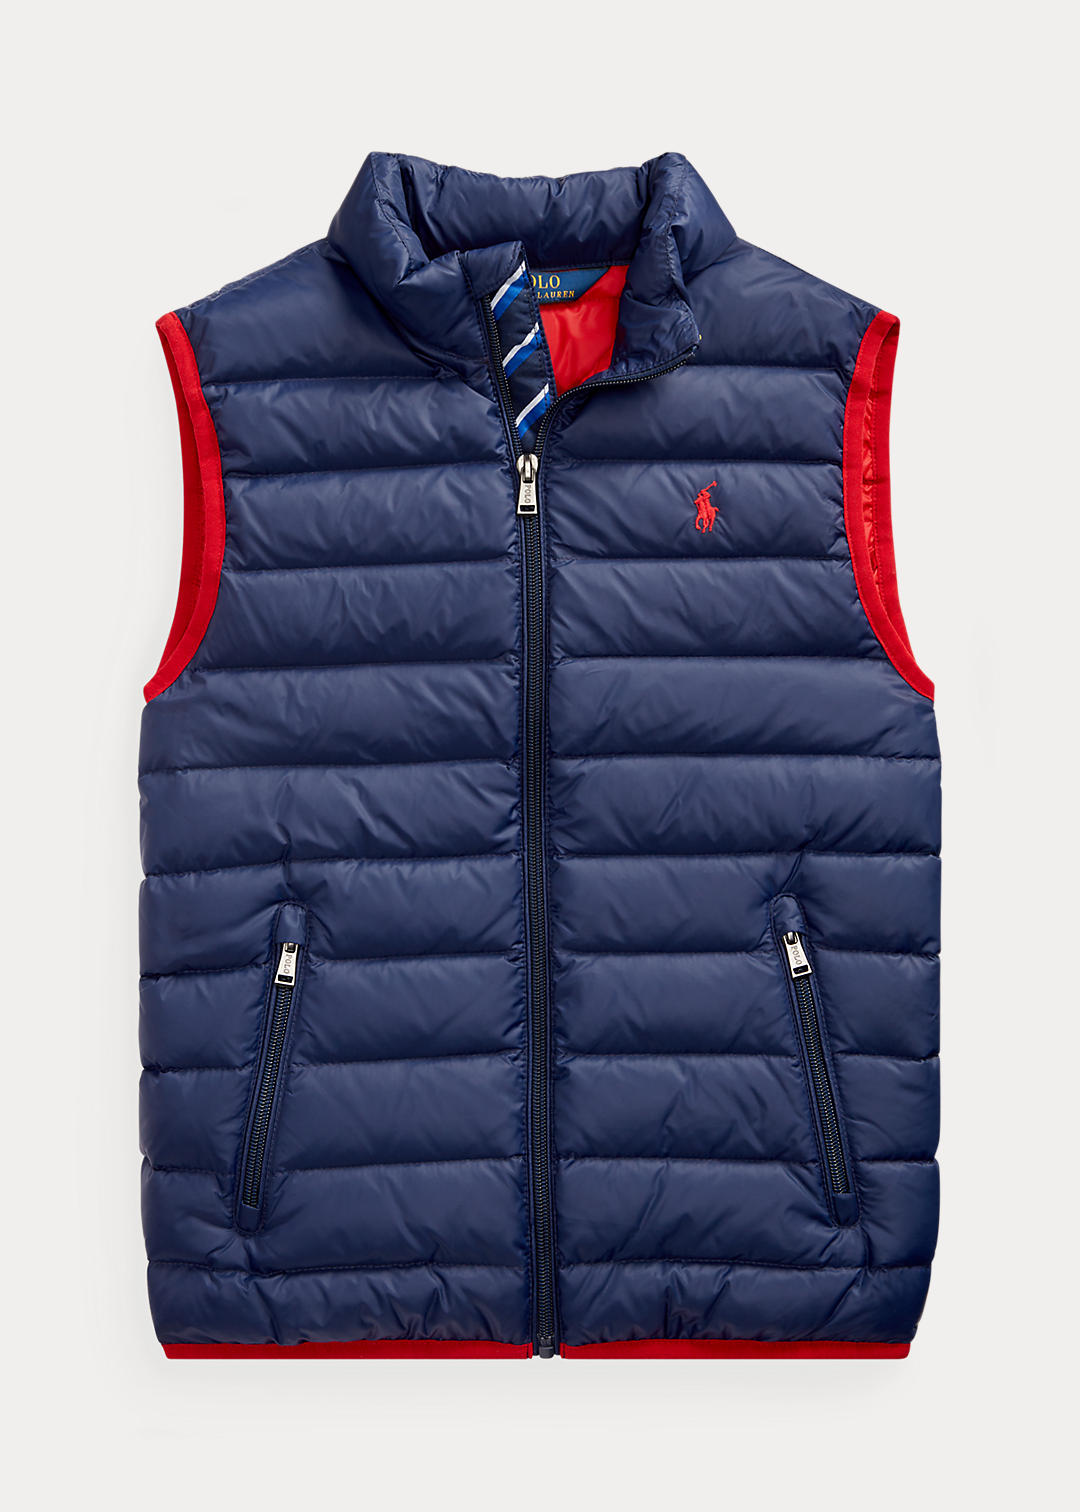 BOYS 6-14 YEARS Packable Quilted Down Gilet 1